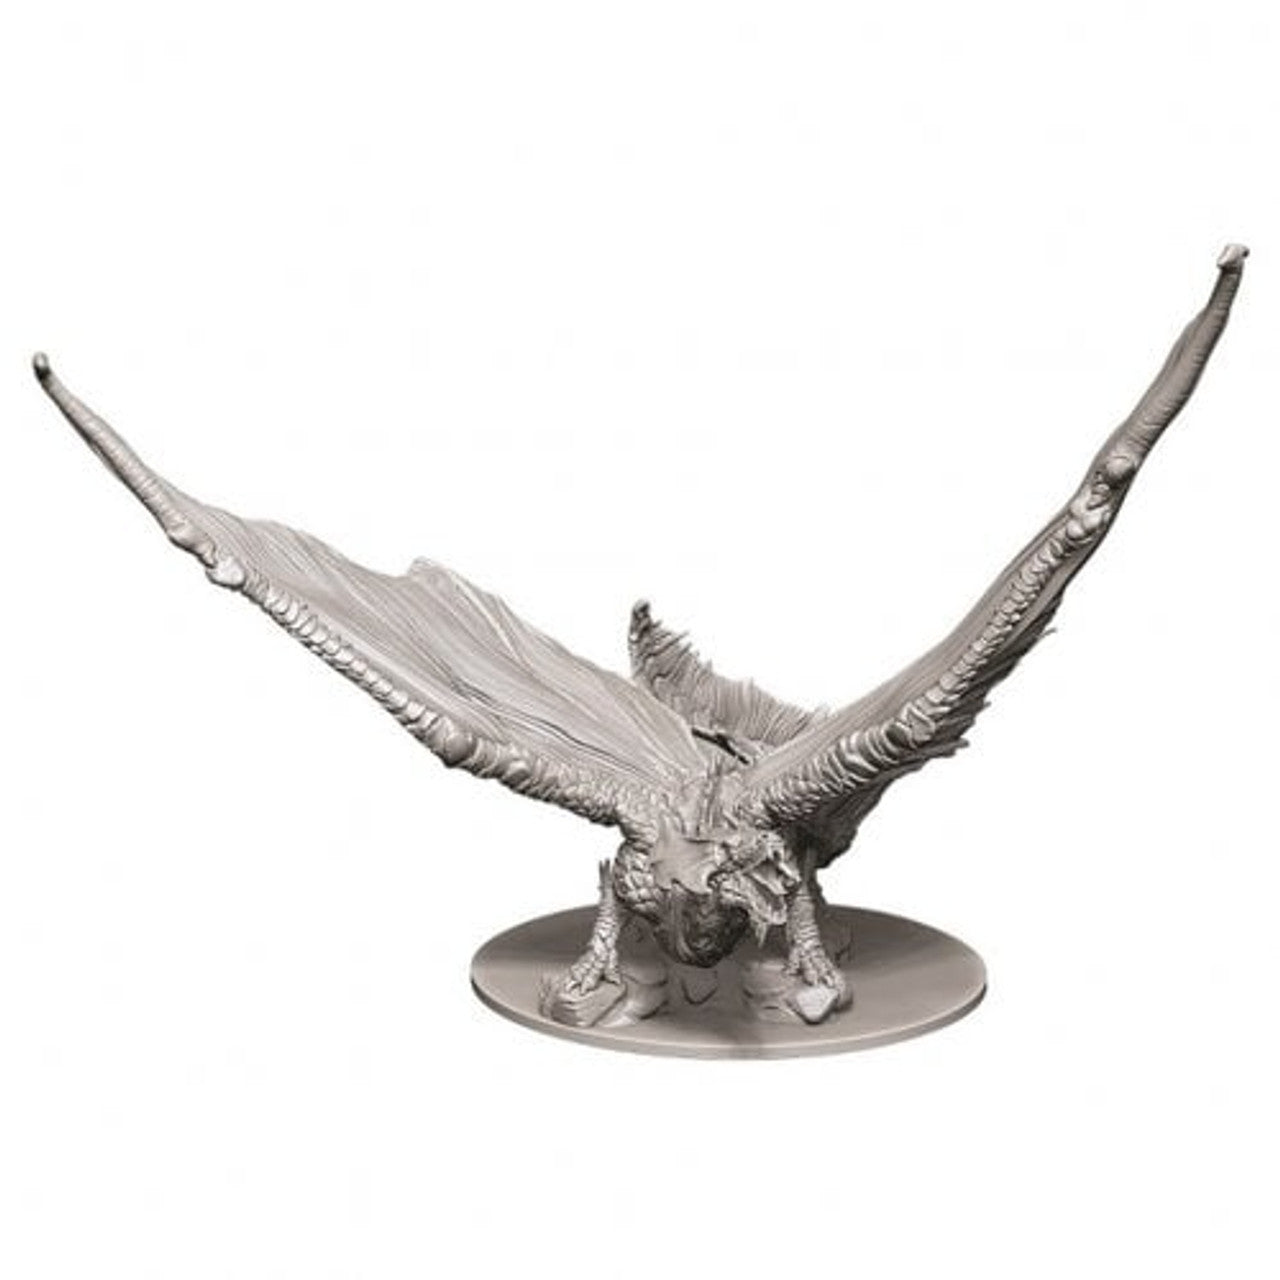 Young Brass Dragon: D&D Nolzur's Marvelous Unpainted Miniatures (W9) - Loaded Dice Barry Vale of Glamorgan CF64 3HD